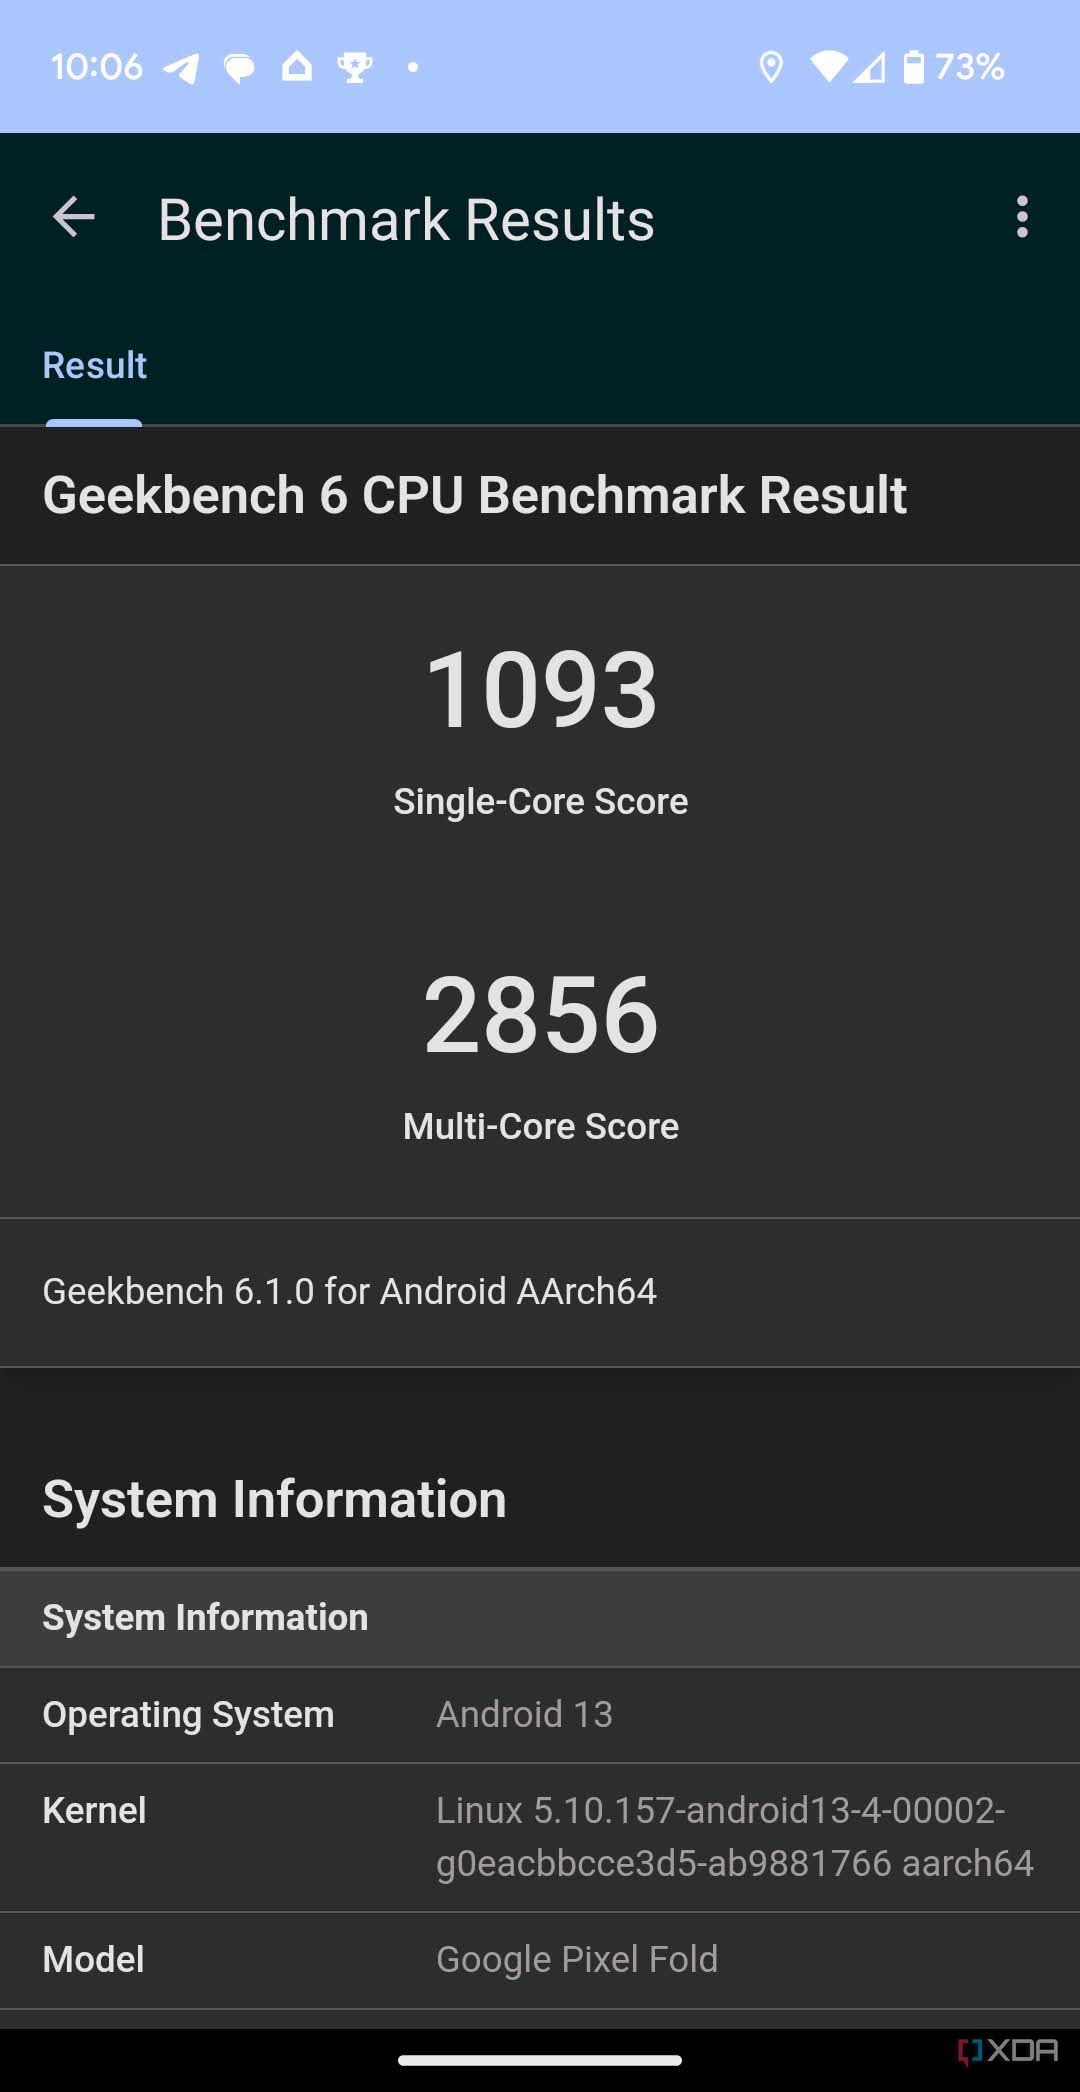 Geekbench 6 results for Google Pixel Fold